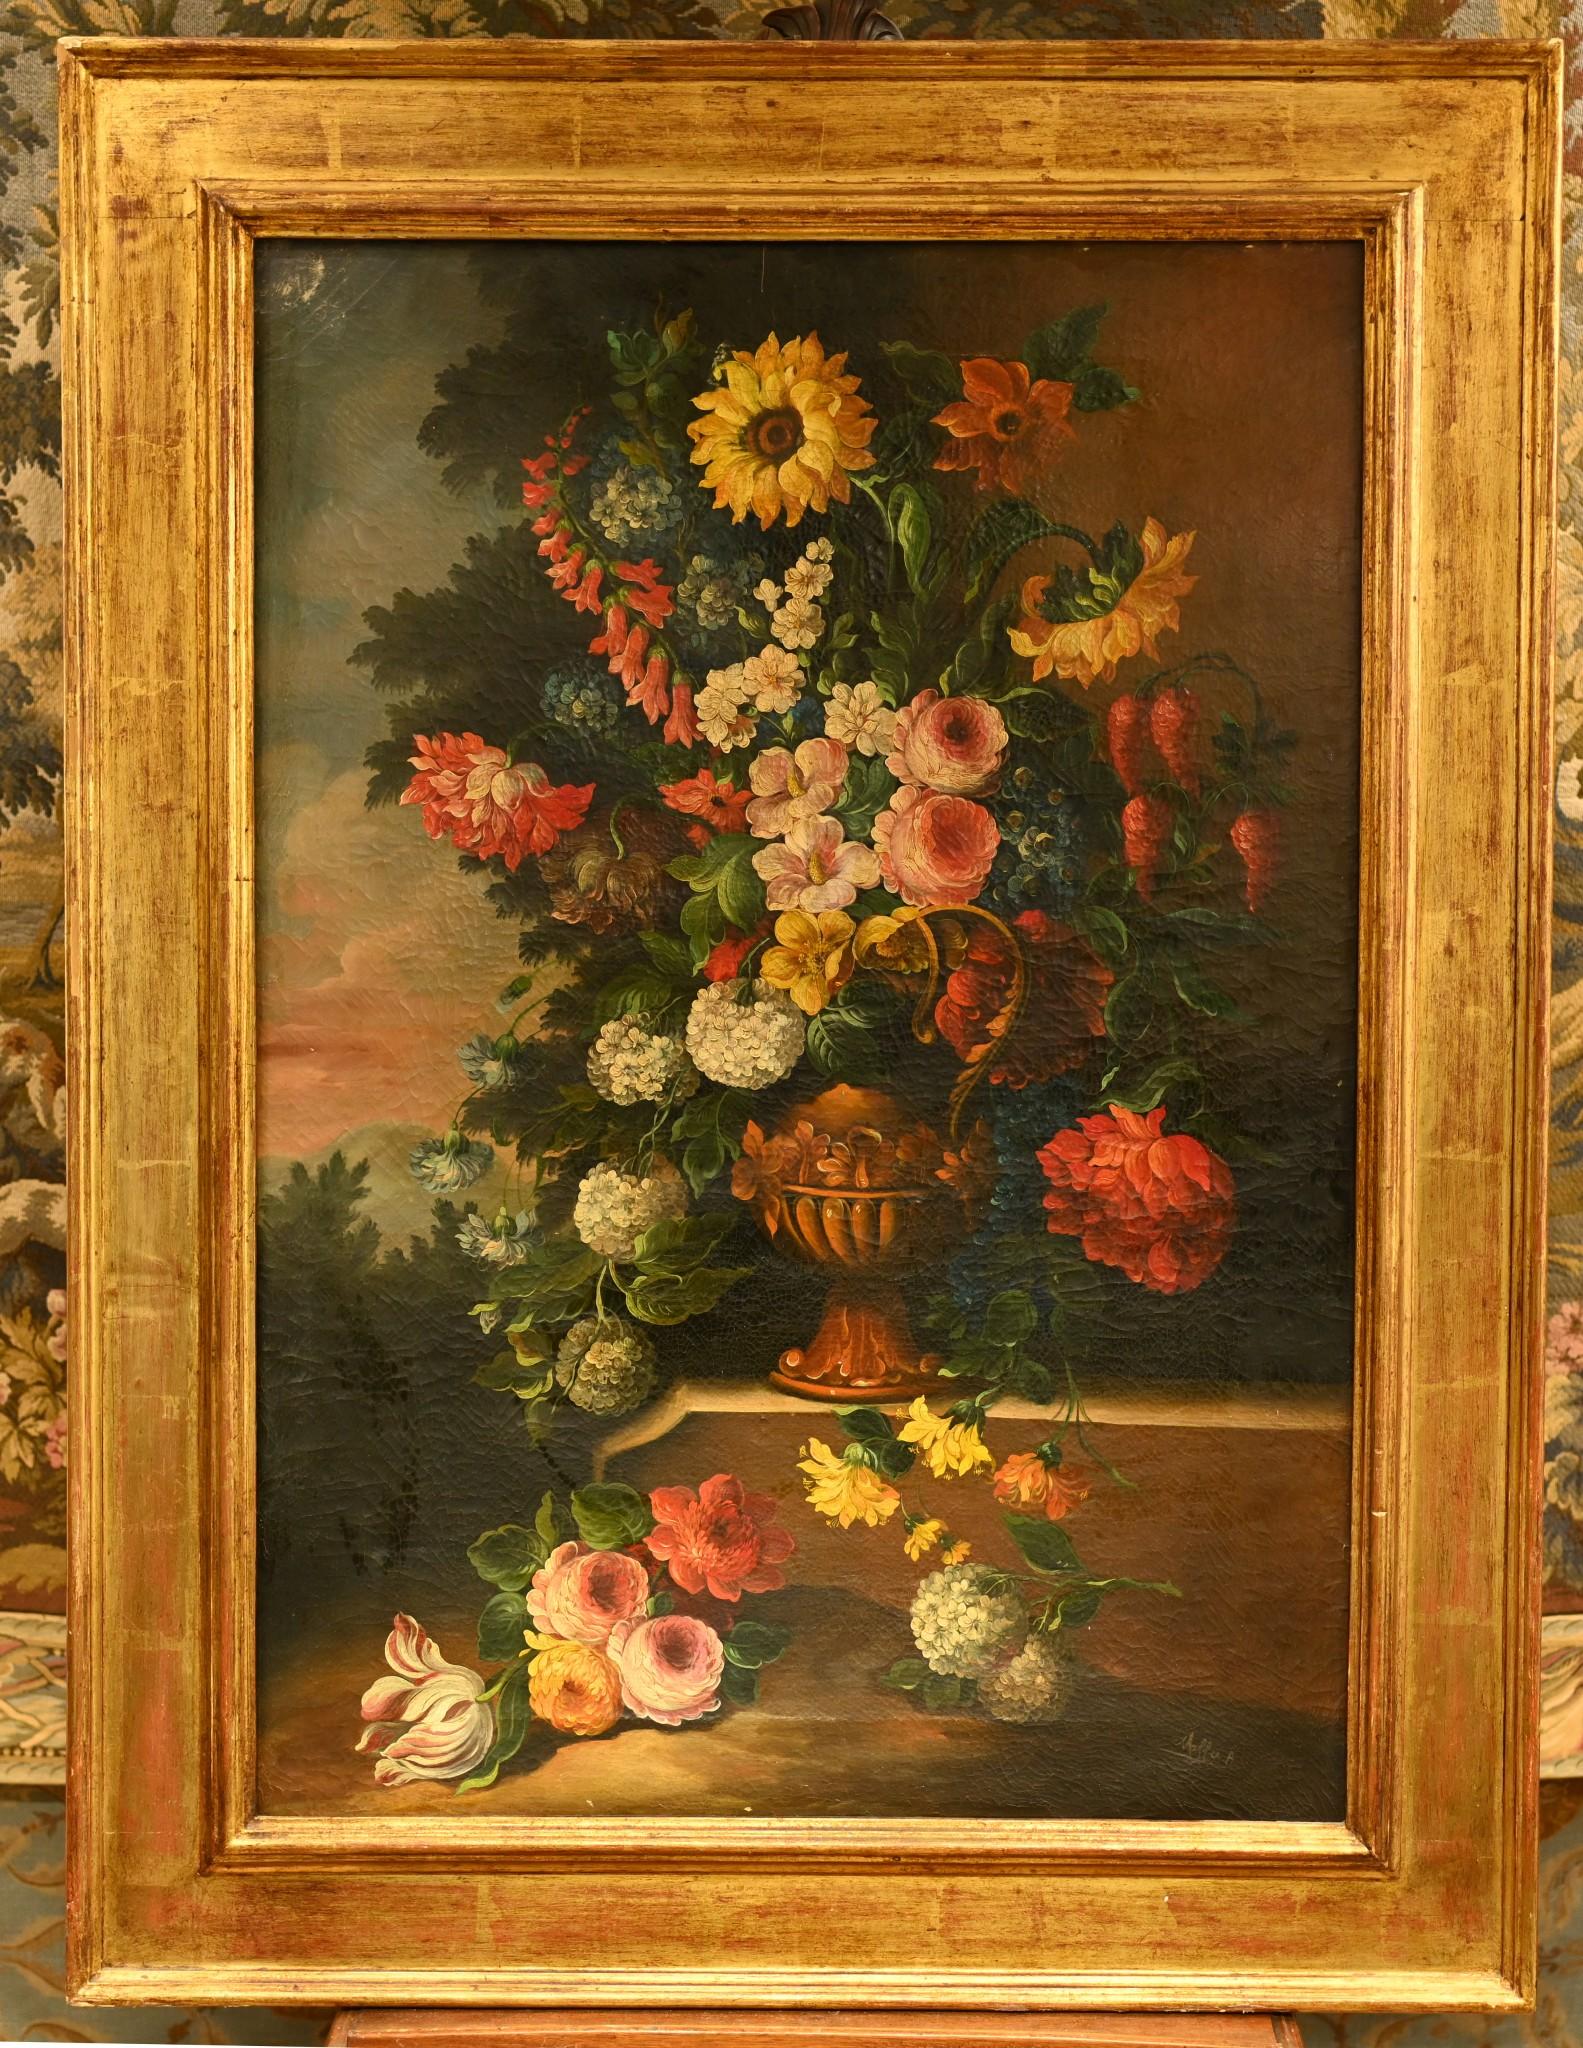 Early 20th Century Flemish Oil Painting Floral Still Life Antique Art 1900 For Sale